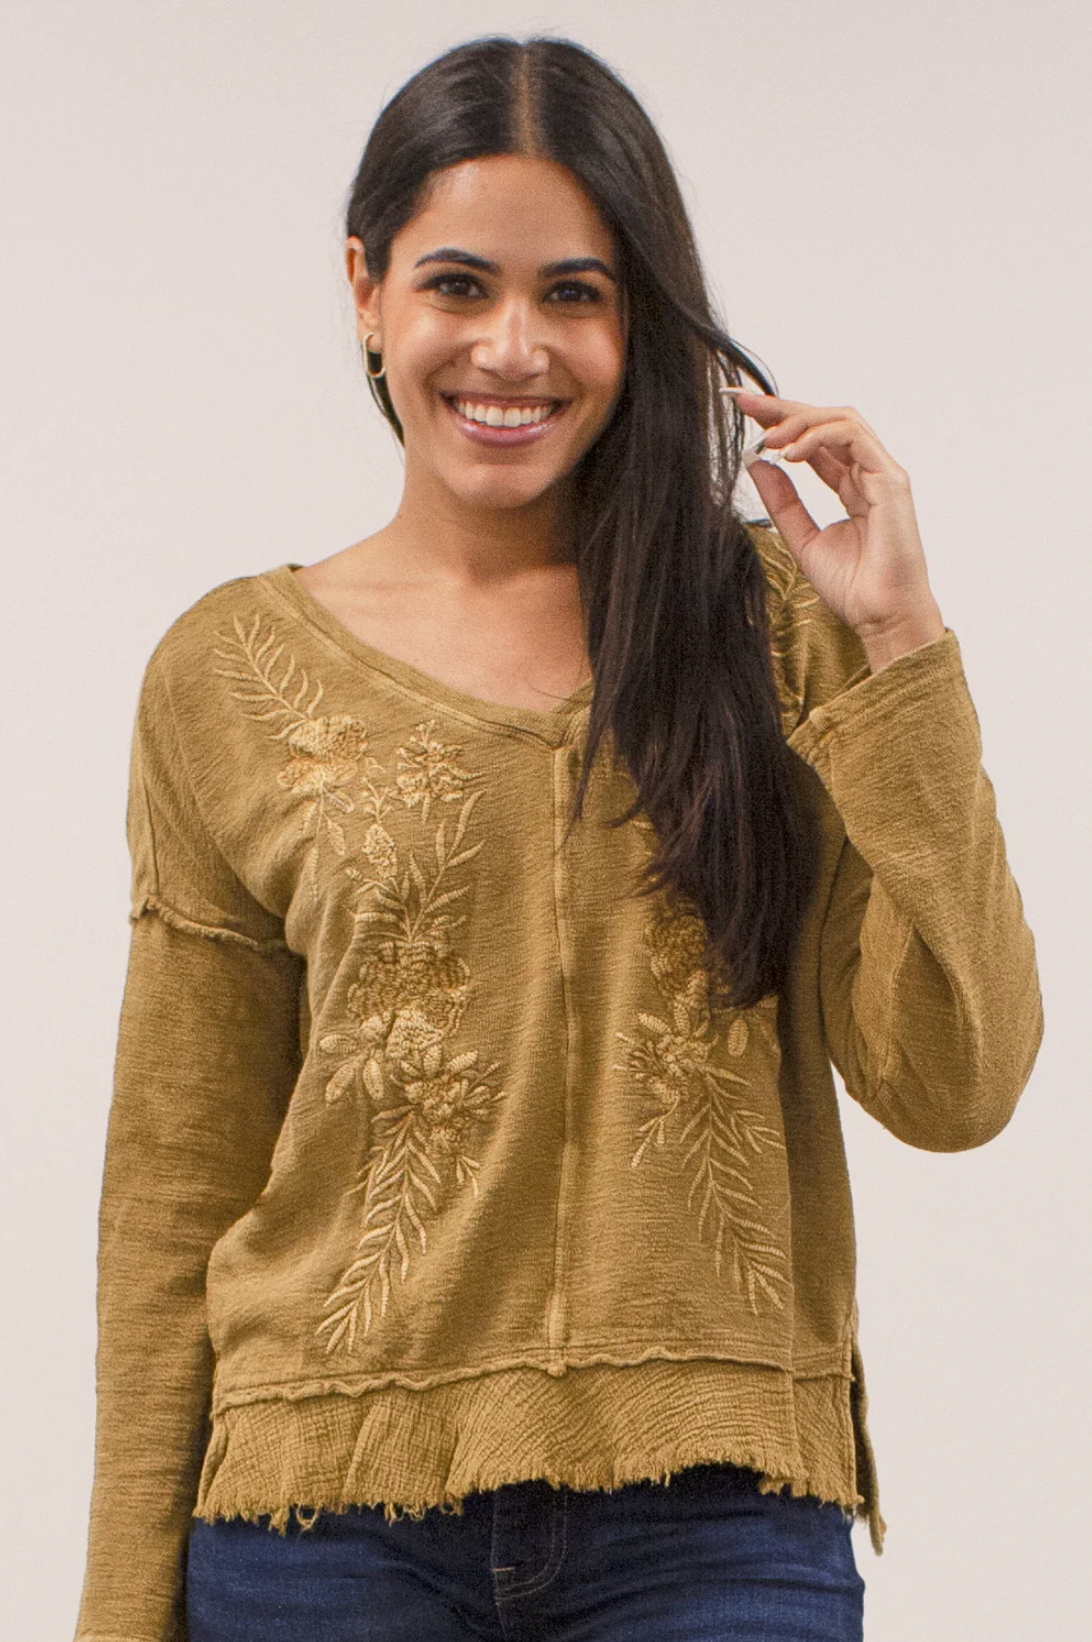 Caite - Kyla Seo Jonna Top - Cotton Gauze - Biscotti available at The Good Life Boutique